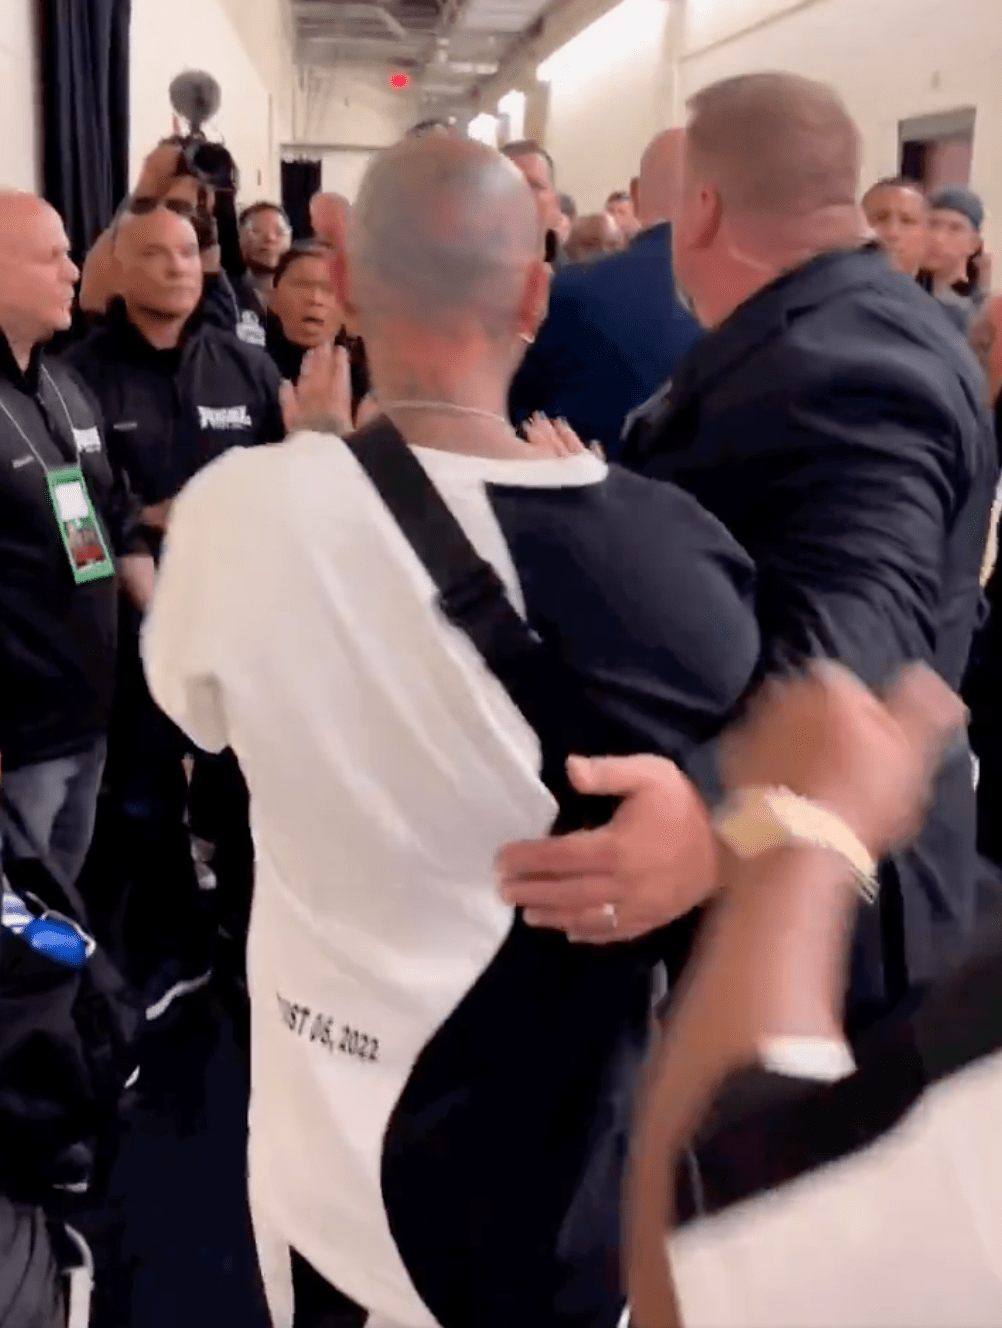 , Watch Nate Diaz slap one of Jake Paul’s team backstage after shocking 20-man bust-up following Anderson Silva fight